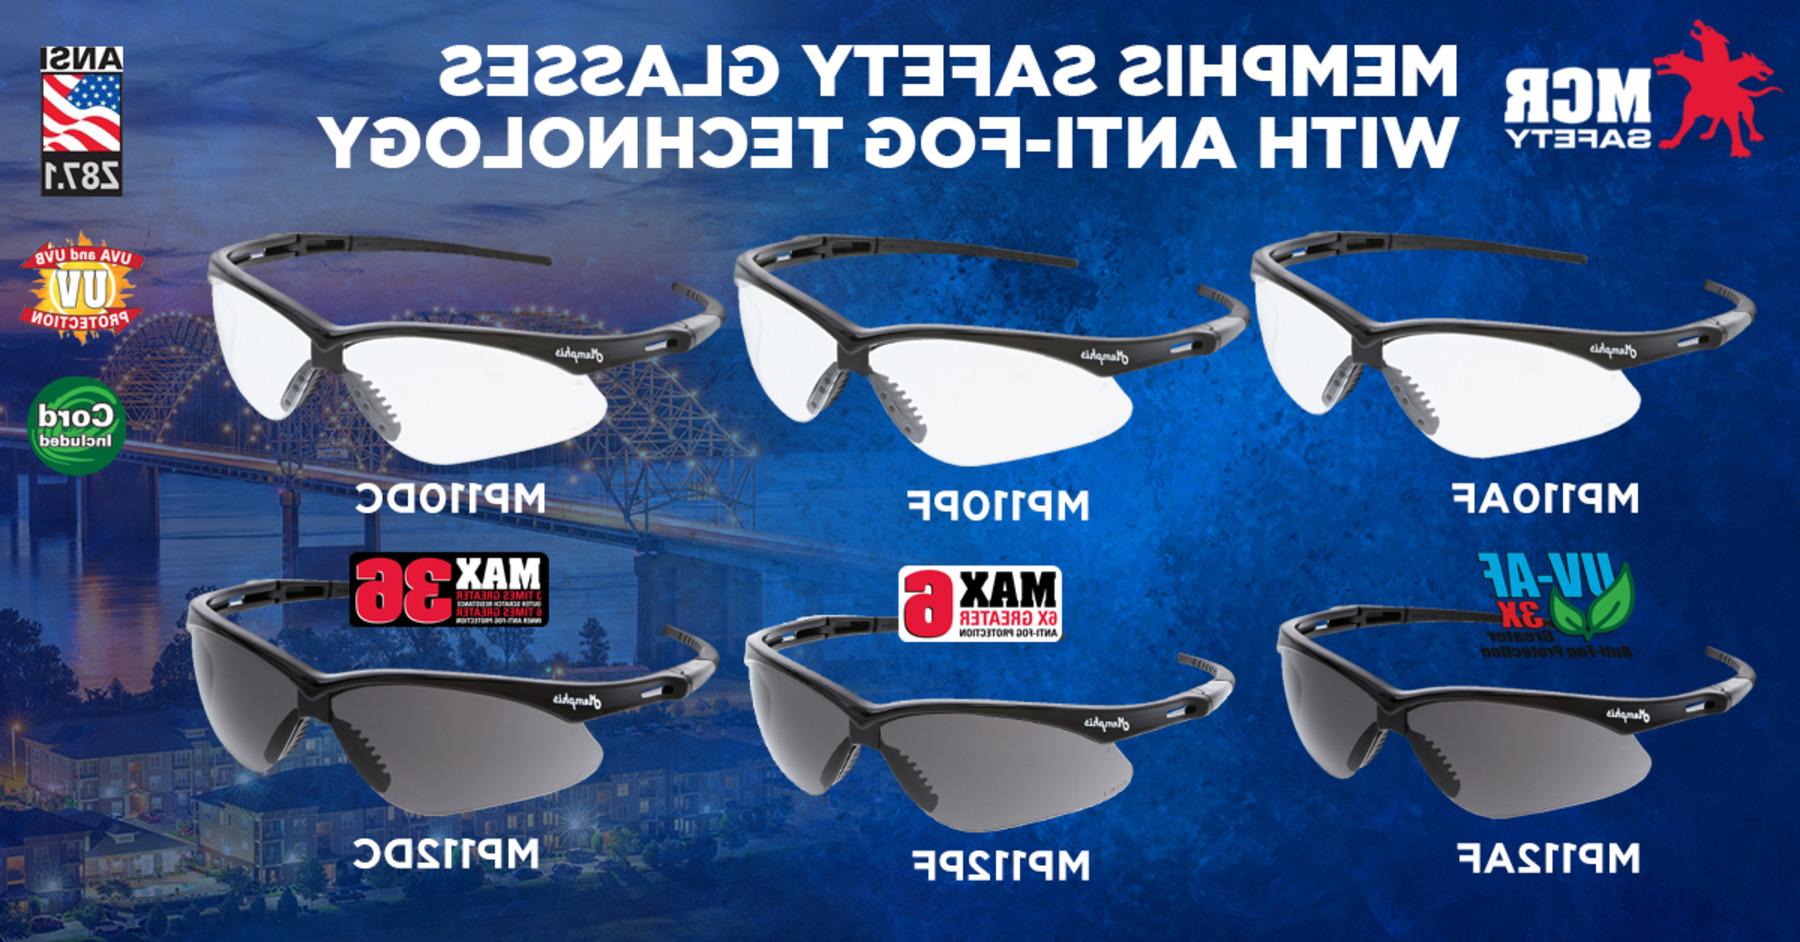 Memphis Safety Glasses with Anti-Fog Technology